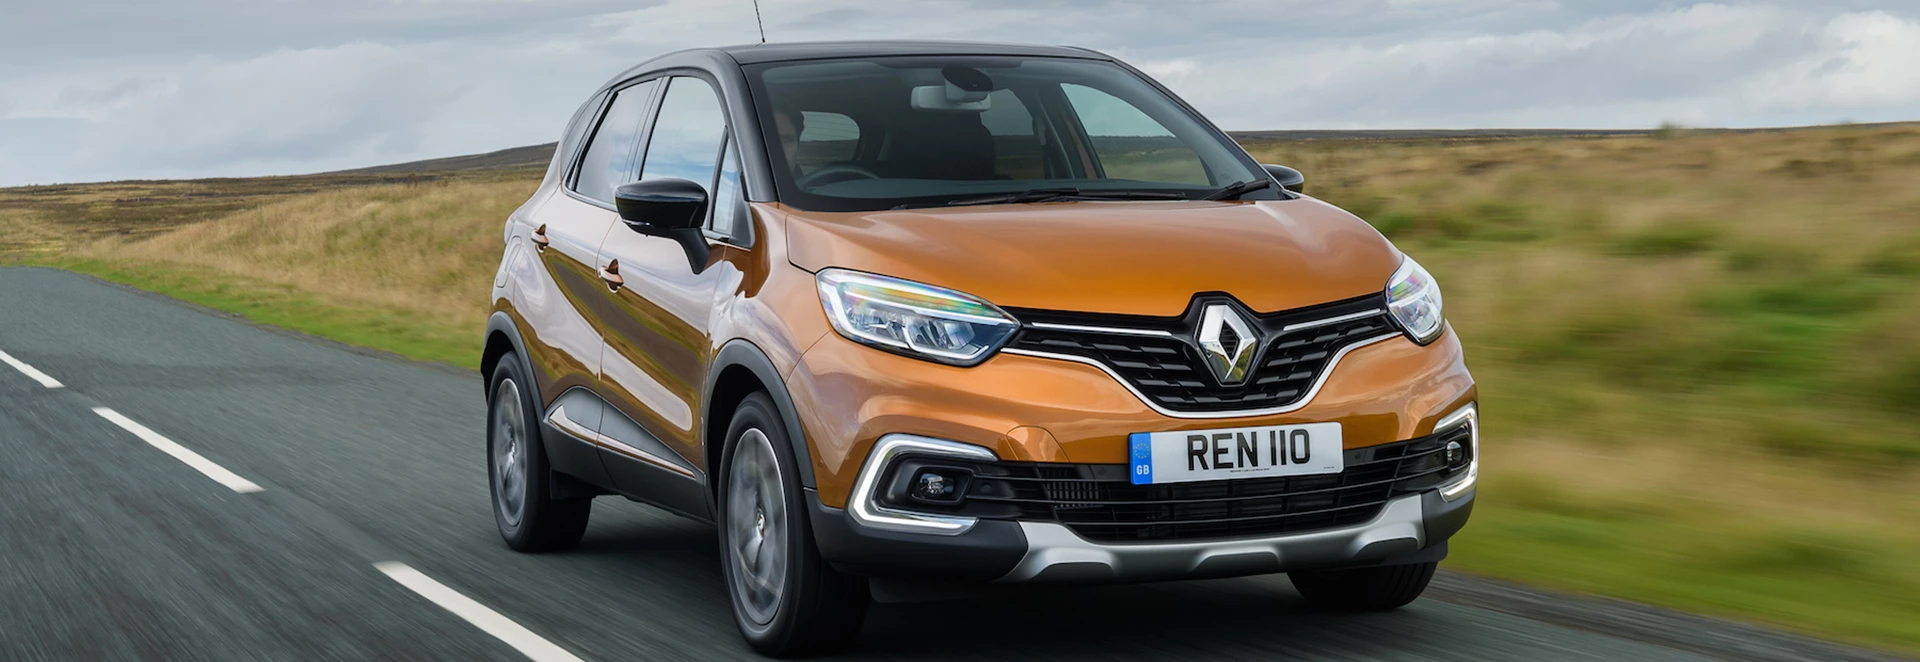 Renault offers new powertrain with Captur 